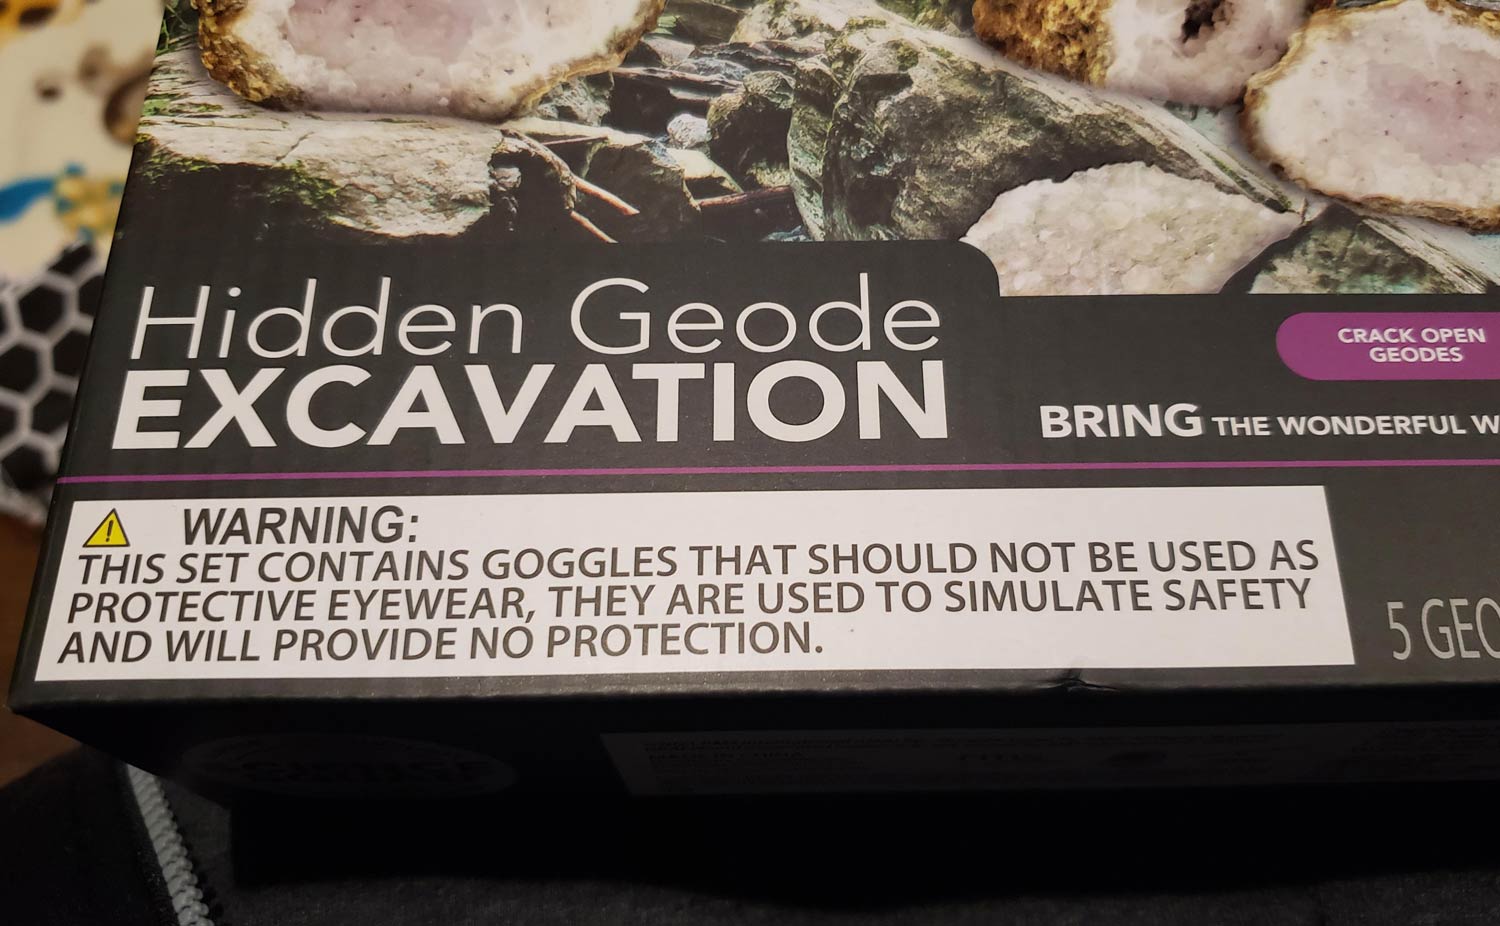 I give you the greatest warning label ever